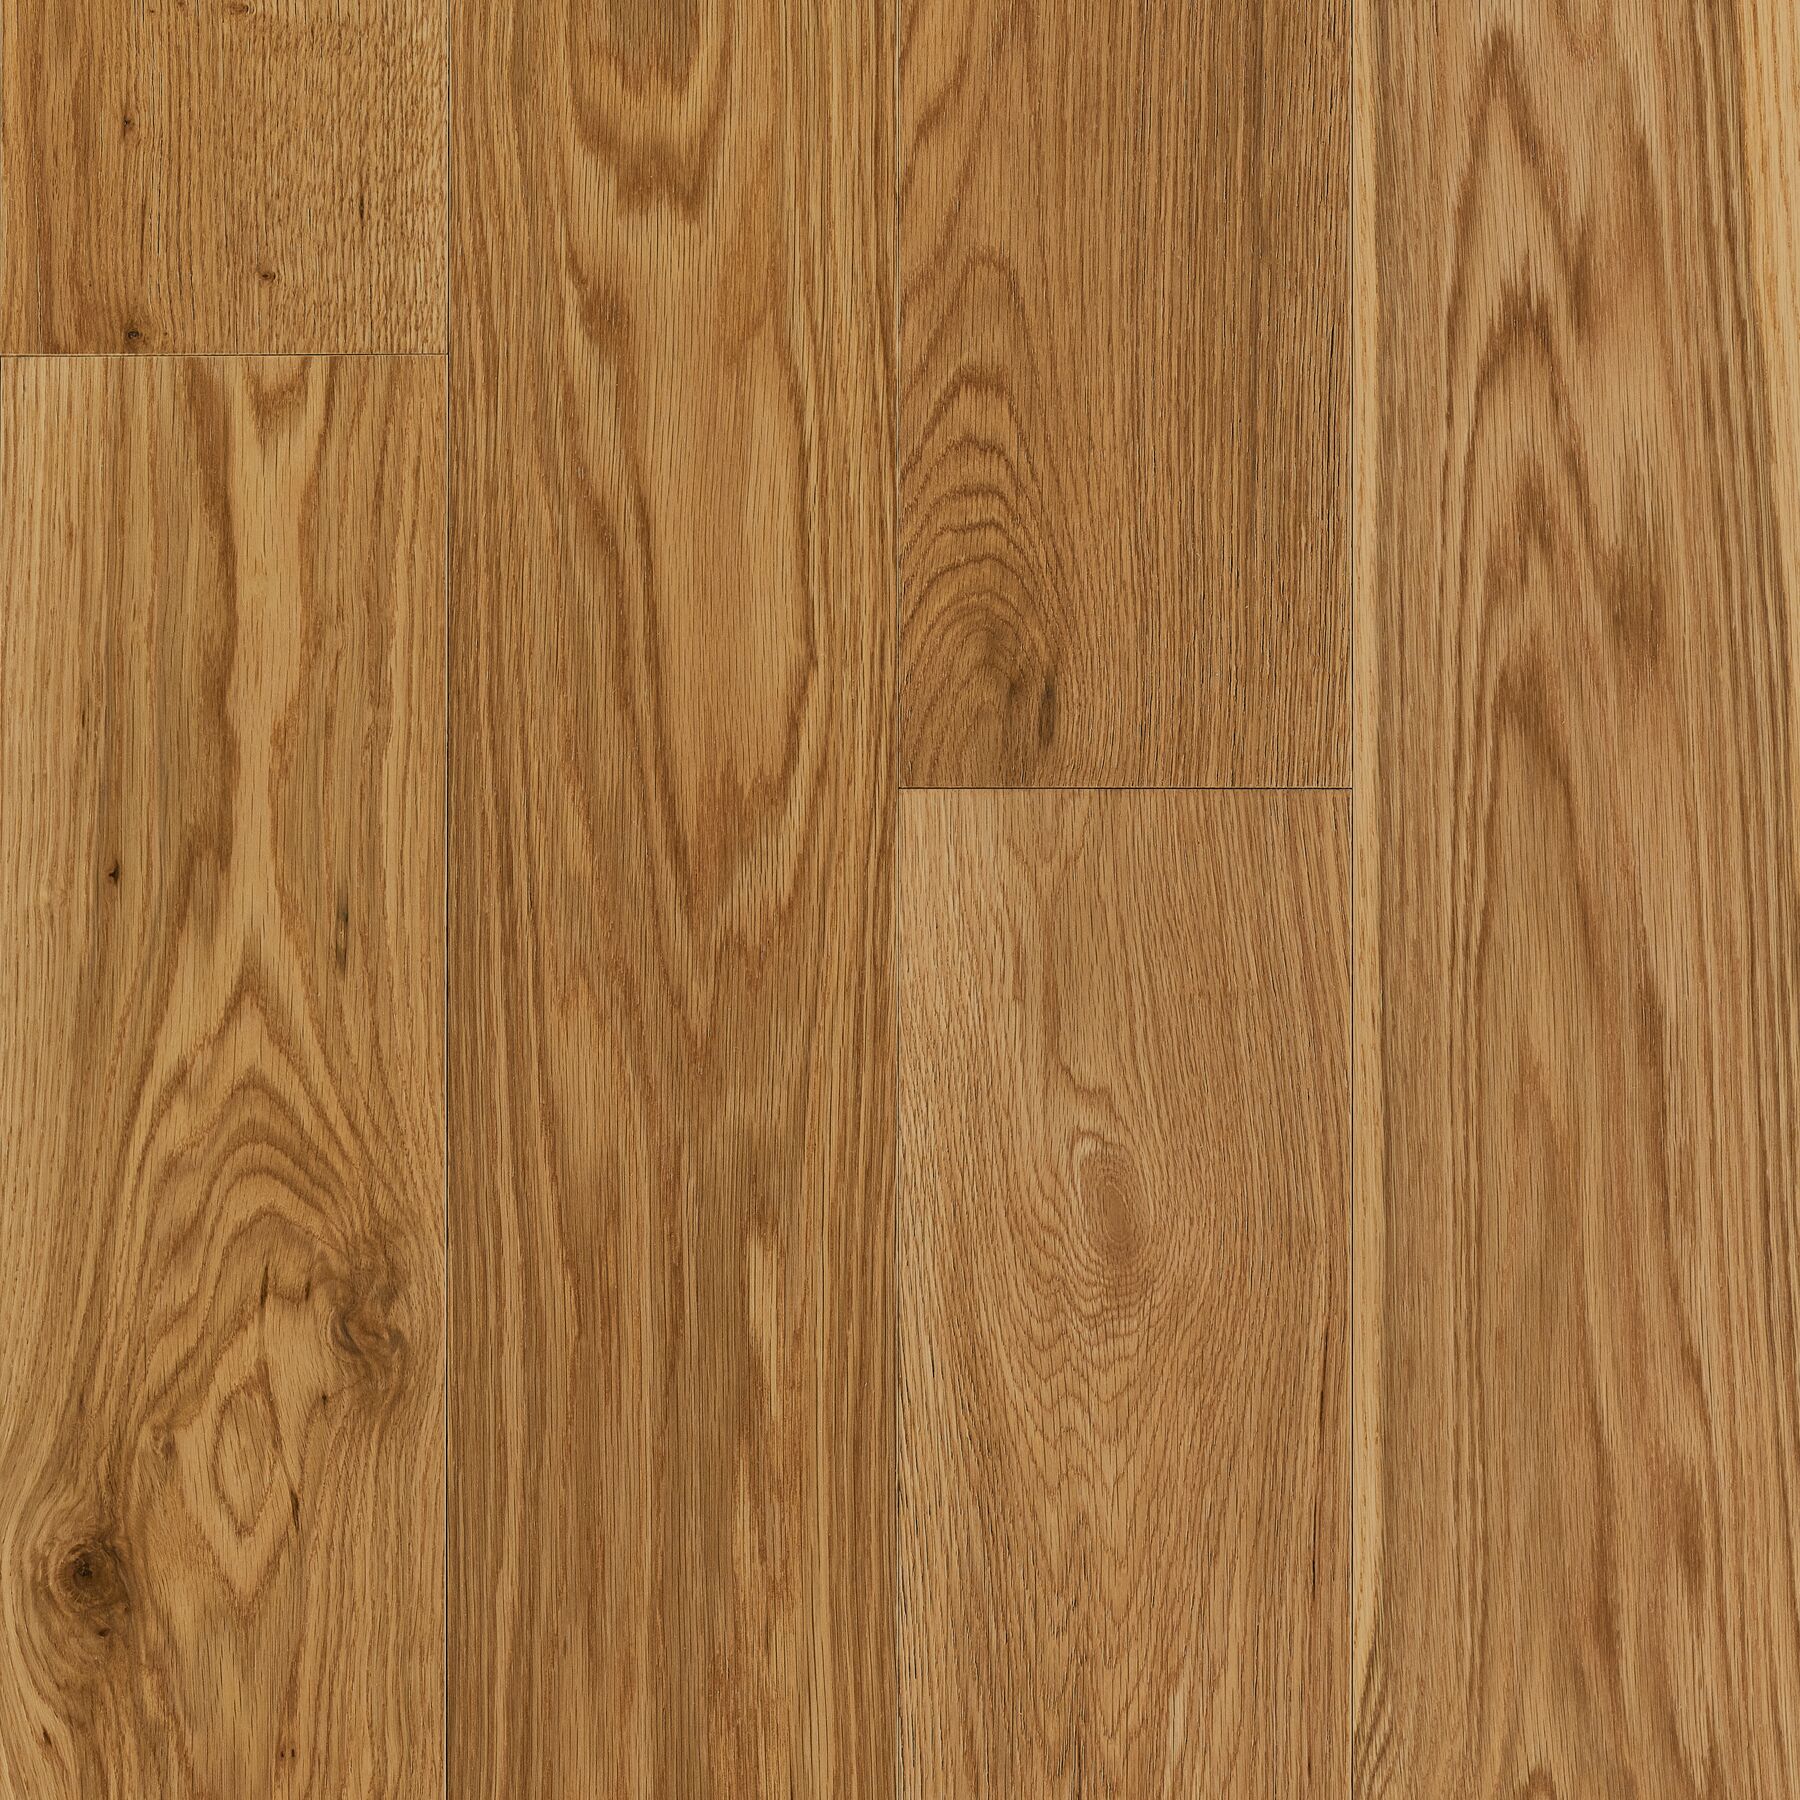 Thatcher Dogwood Hardwood Flooring Featuring Densified Wood That's Pet-Friendly